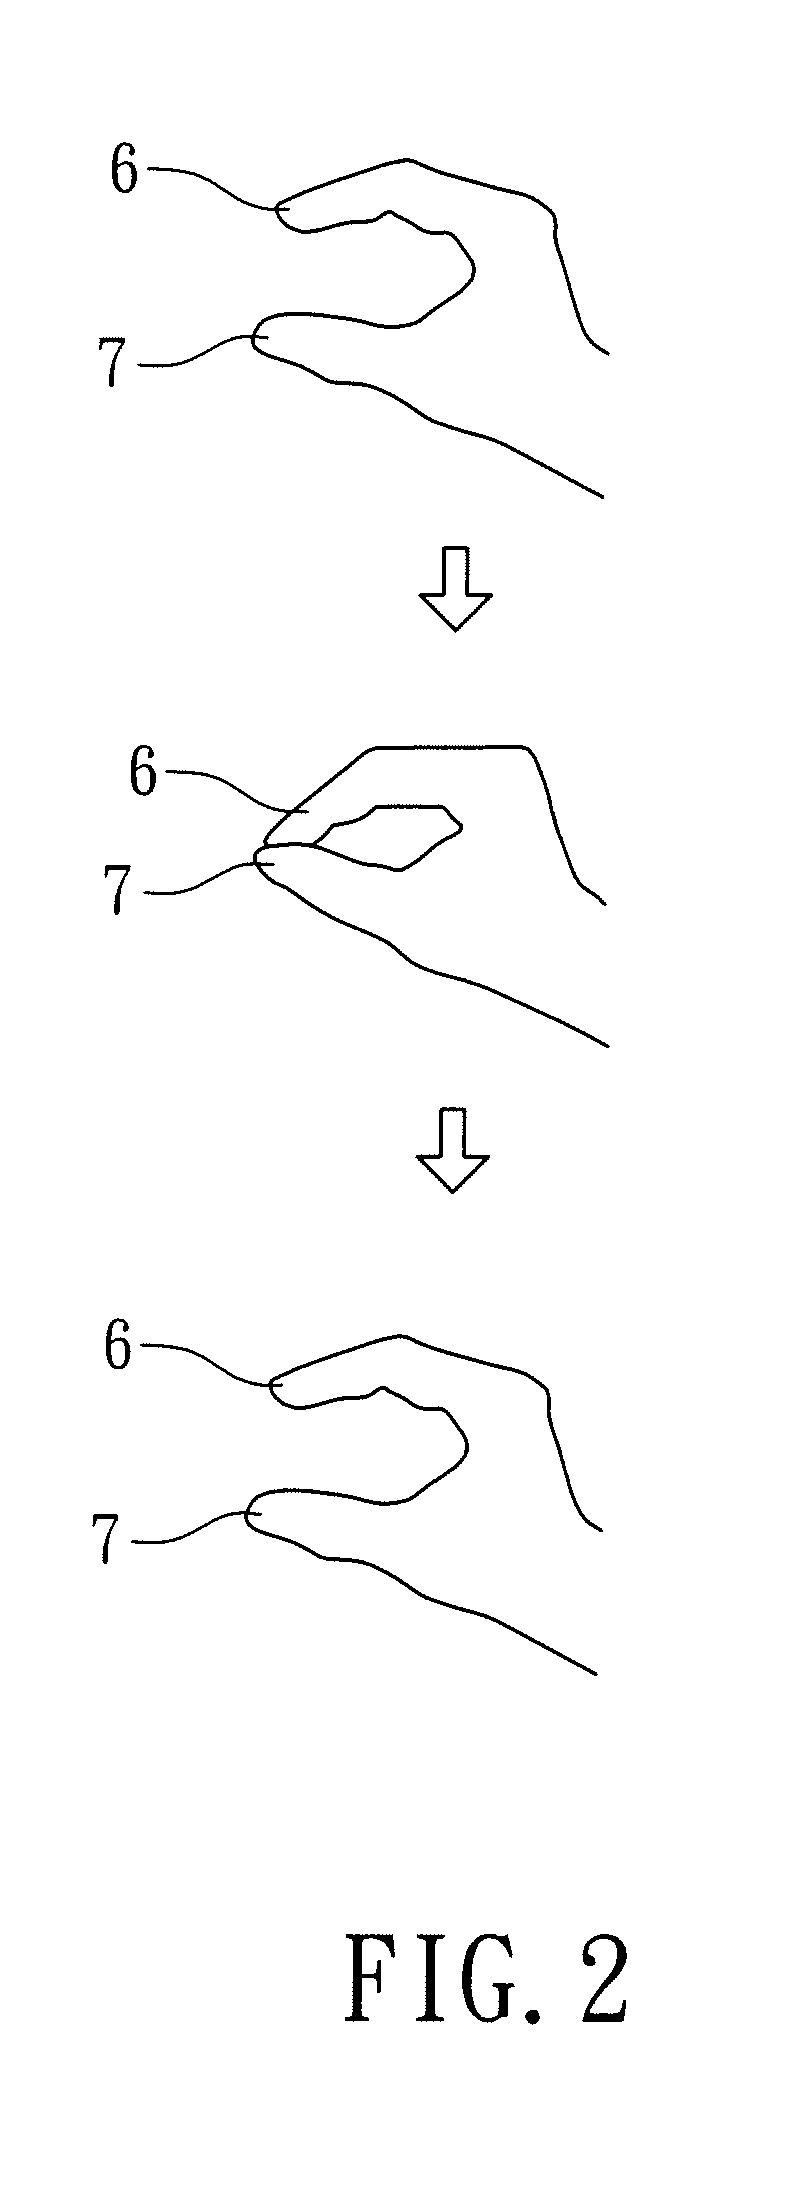 Gesture-based control method for interactive screen control